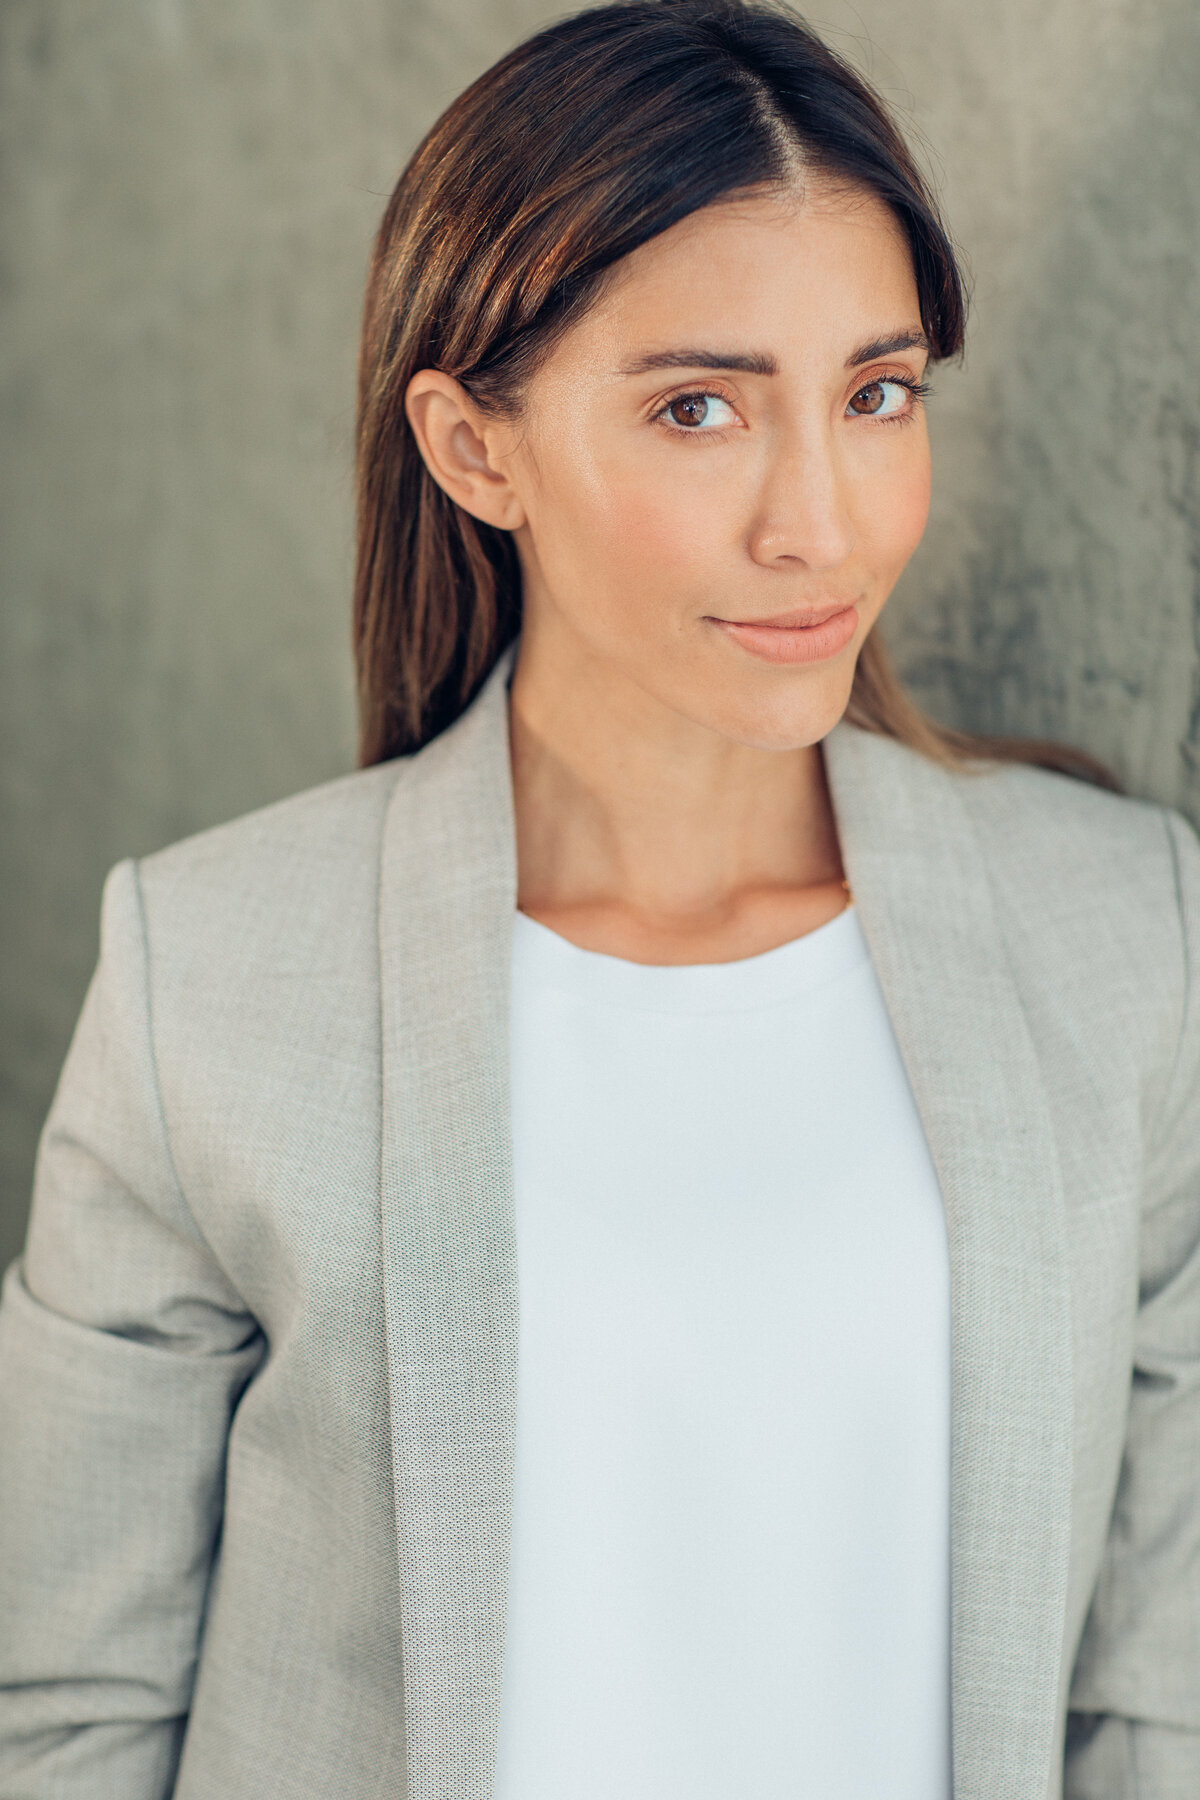 Headshot Photograph Of Young Woman In Outer Light Gray Blazer  And Inner White Shirt Los Angeles